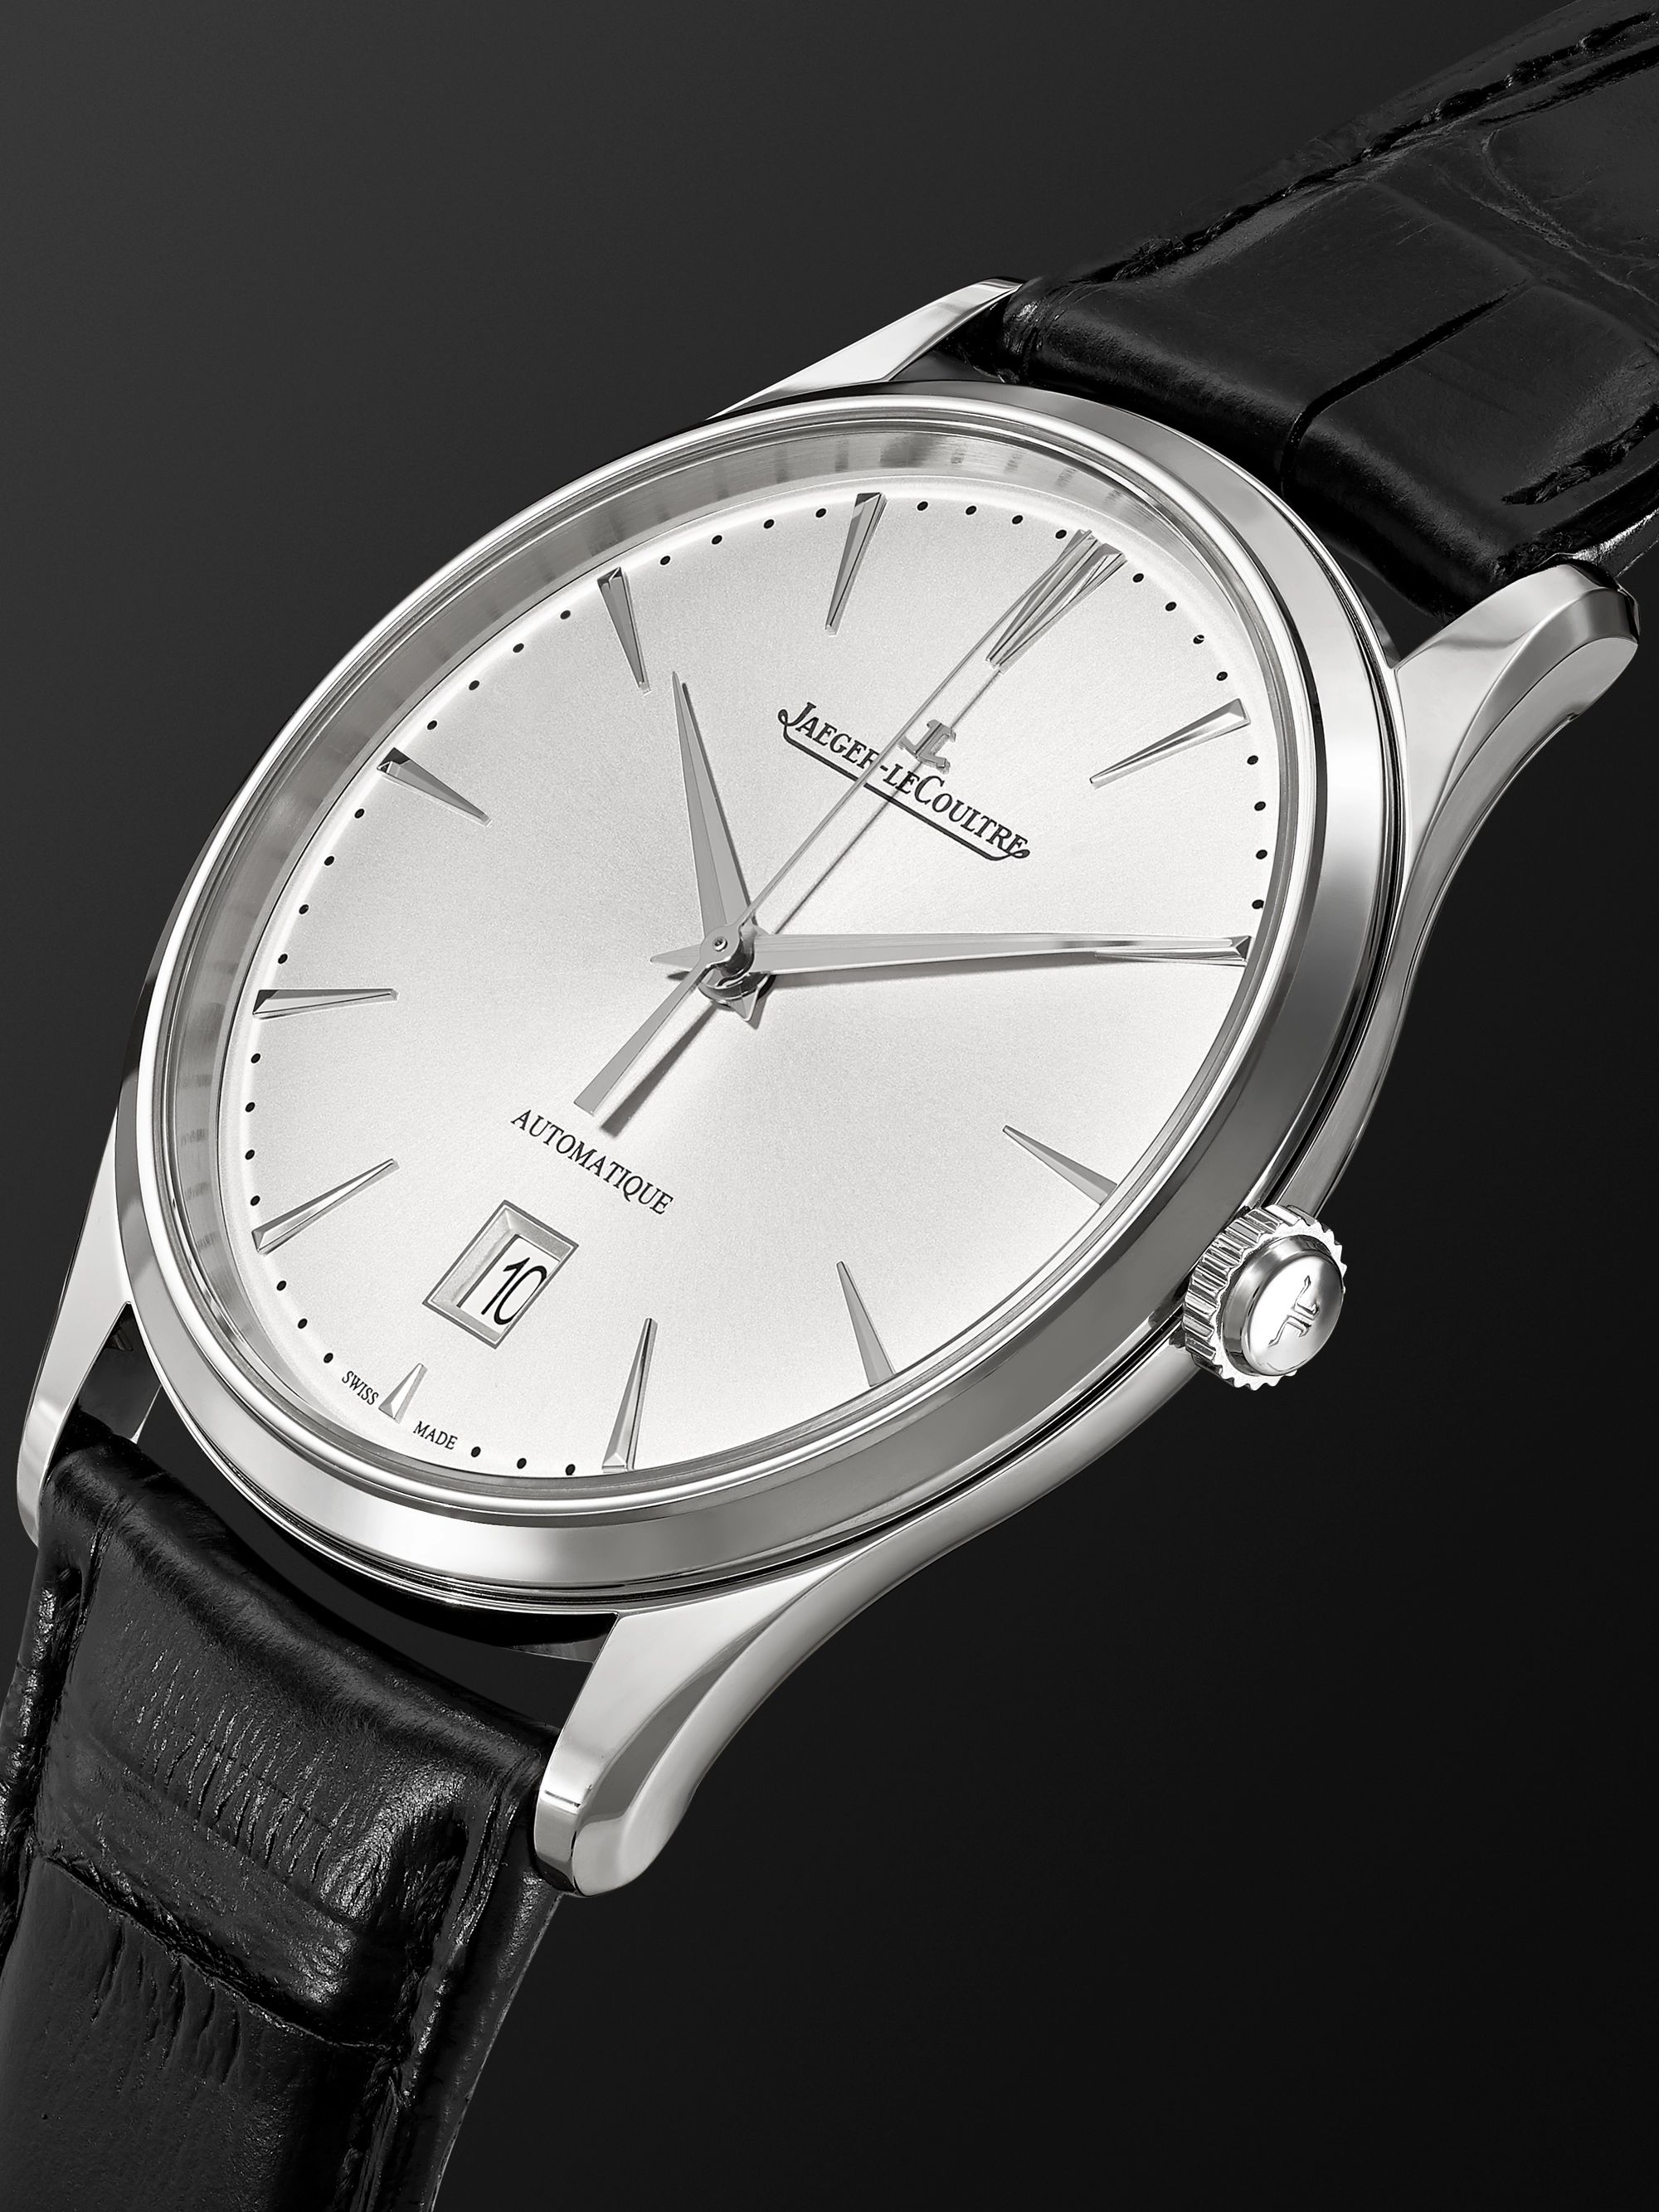 JAEGER-LECOULTRE Master Ultra Thin Date Automatic 39mm Stainless Steel and Alligator Watch, Ref. No. 1238420